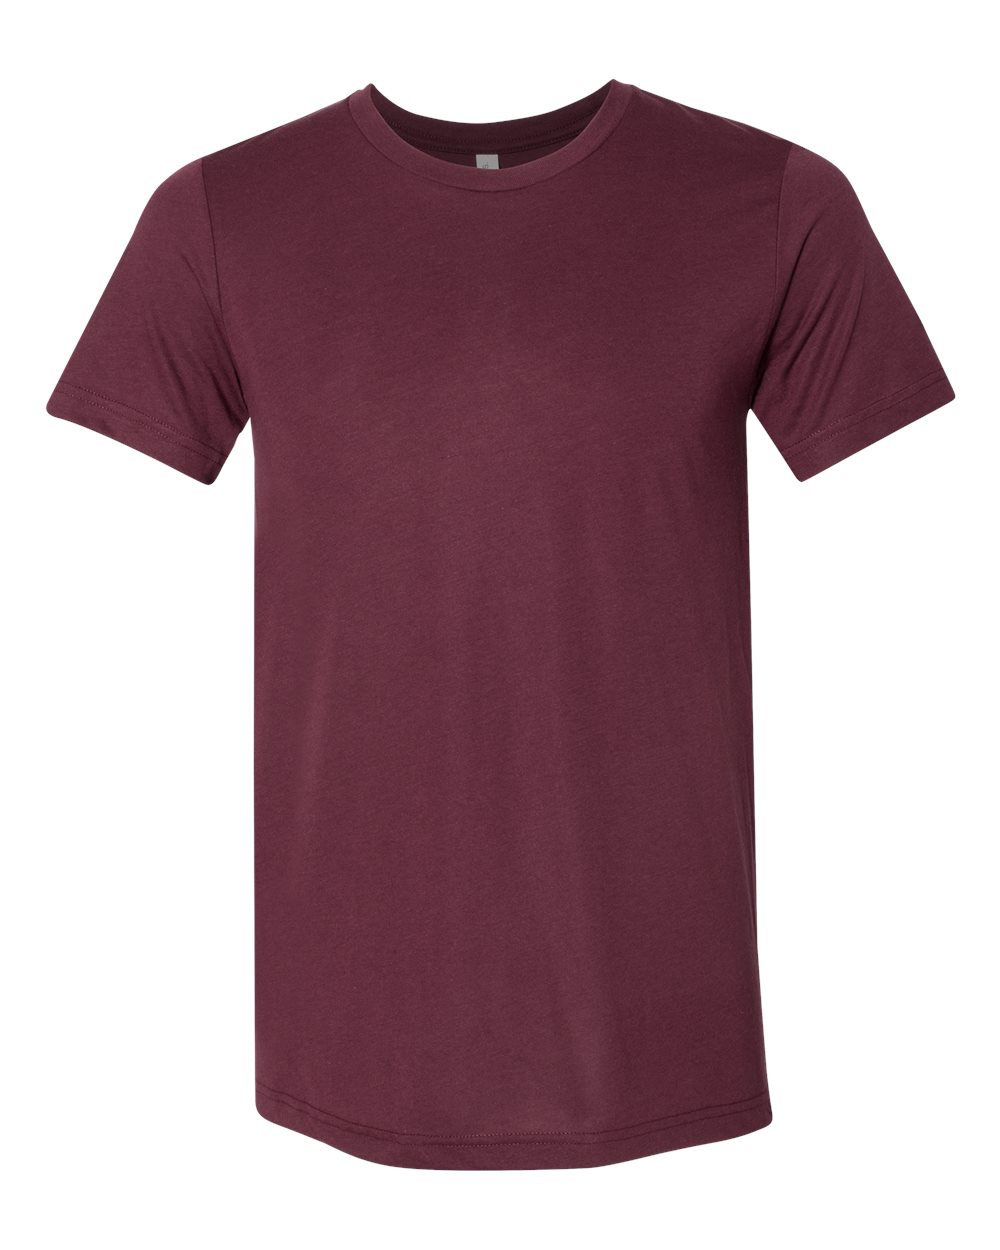 click to view Solid Maroon Triblend